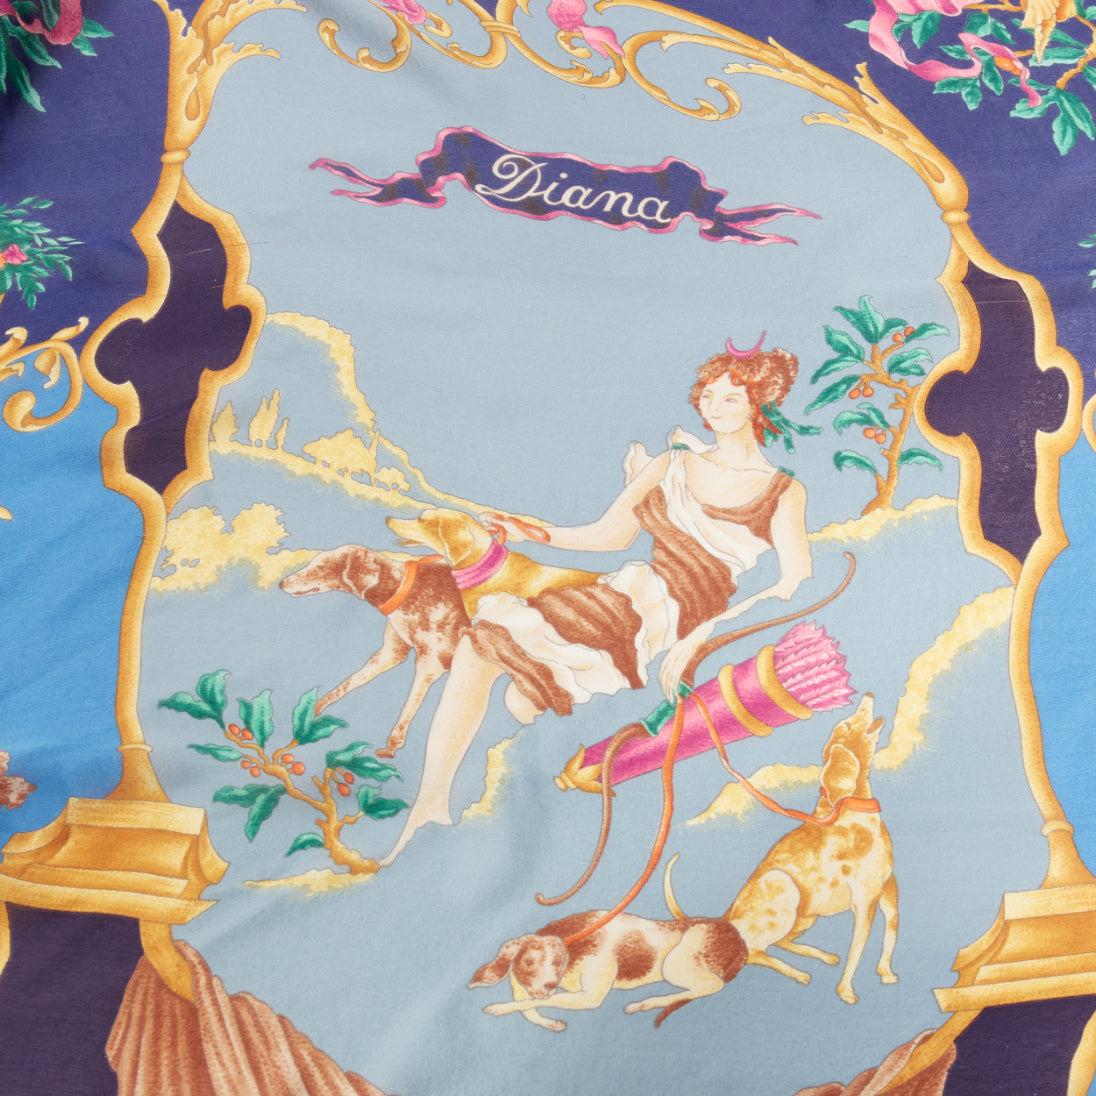 rare GUCCI Tom Ford Vintage Diana Legend Barocco motif silk square scarf
Reference: CNLE/A00266
Brand: Gucci
Designer: Tom Ford
Material: Silk
Color: Multicolour
Pattern: Barocco
Extra Details: Diana and GUCCI logo print.

CONDITION:
Condition: